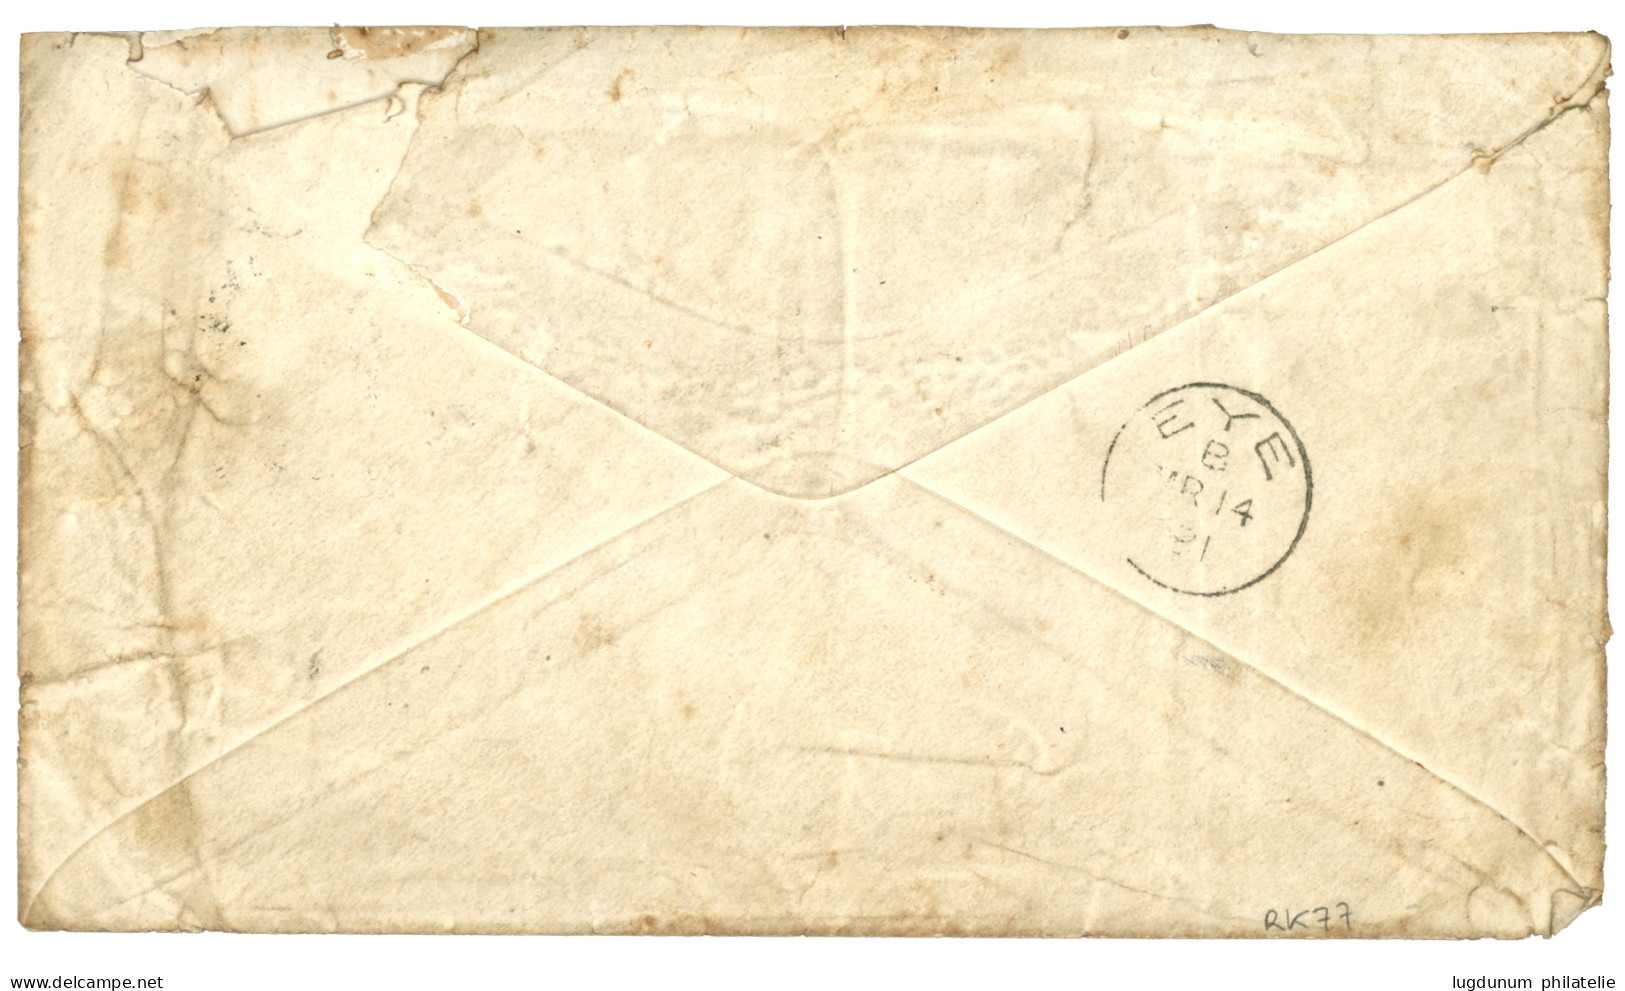 CHILE - Sailor's Concessionary Rate : 1881 GB Pair 1d (pl.192) Canc. C35 + PANAMA On Extraordinary Hand Painted Envelope - Cile